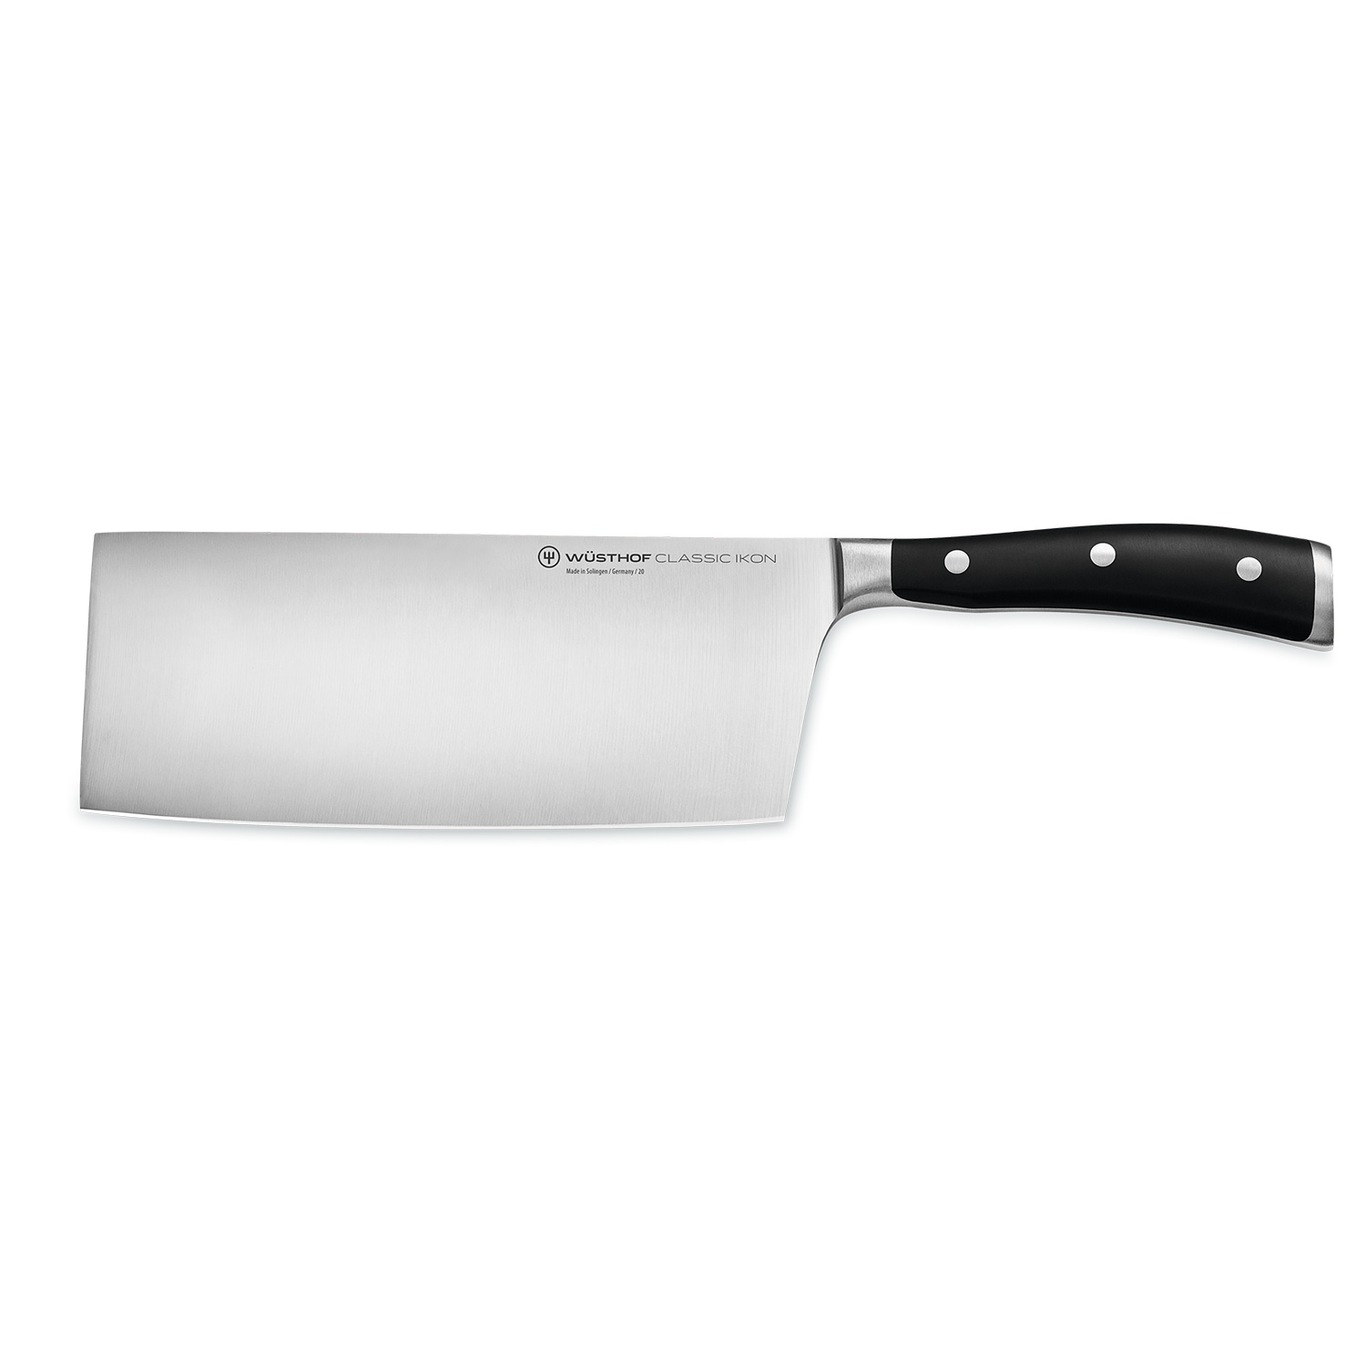 Classic Ikon Chinese Chef Knife, 18 cm